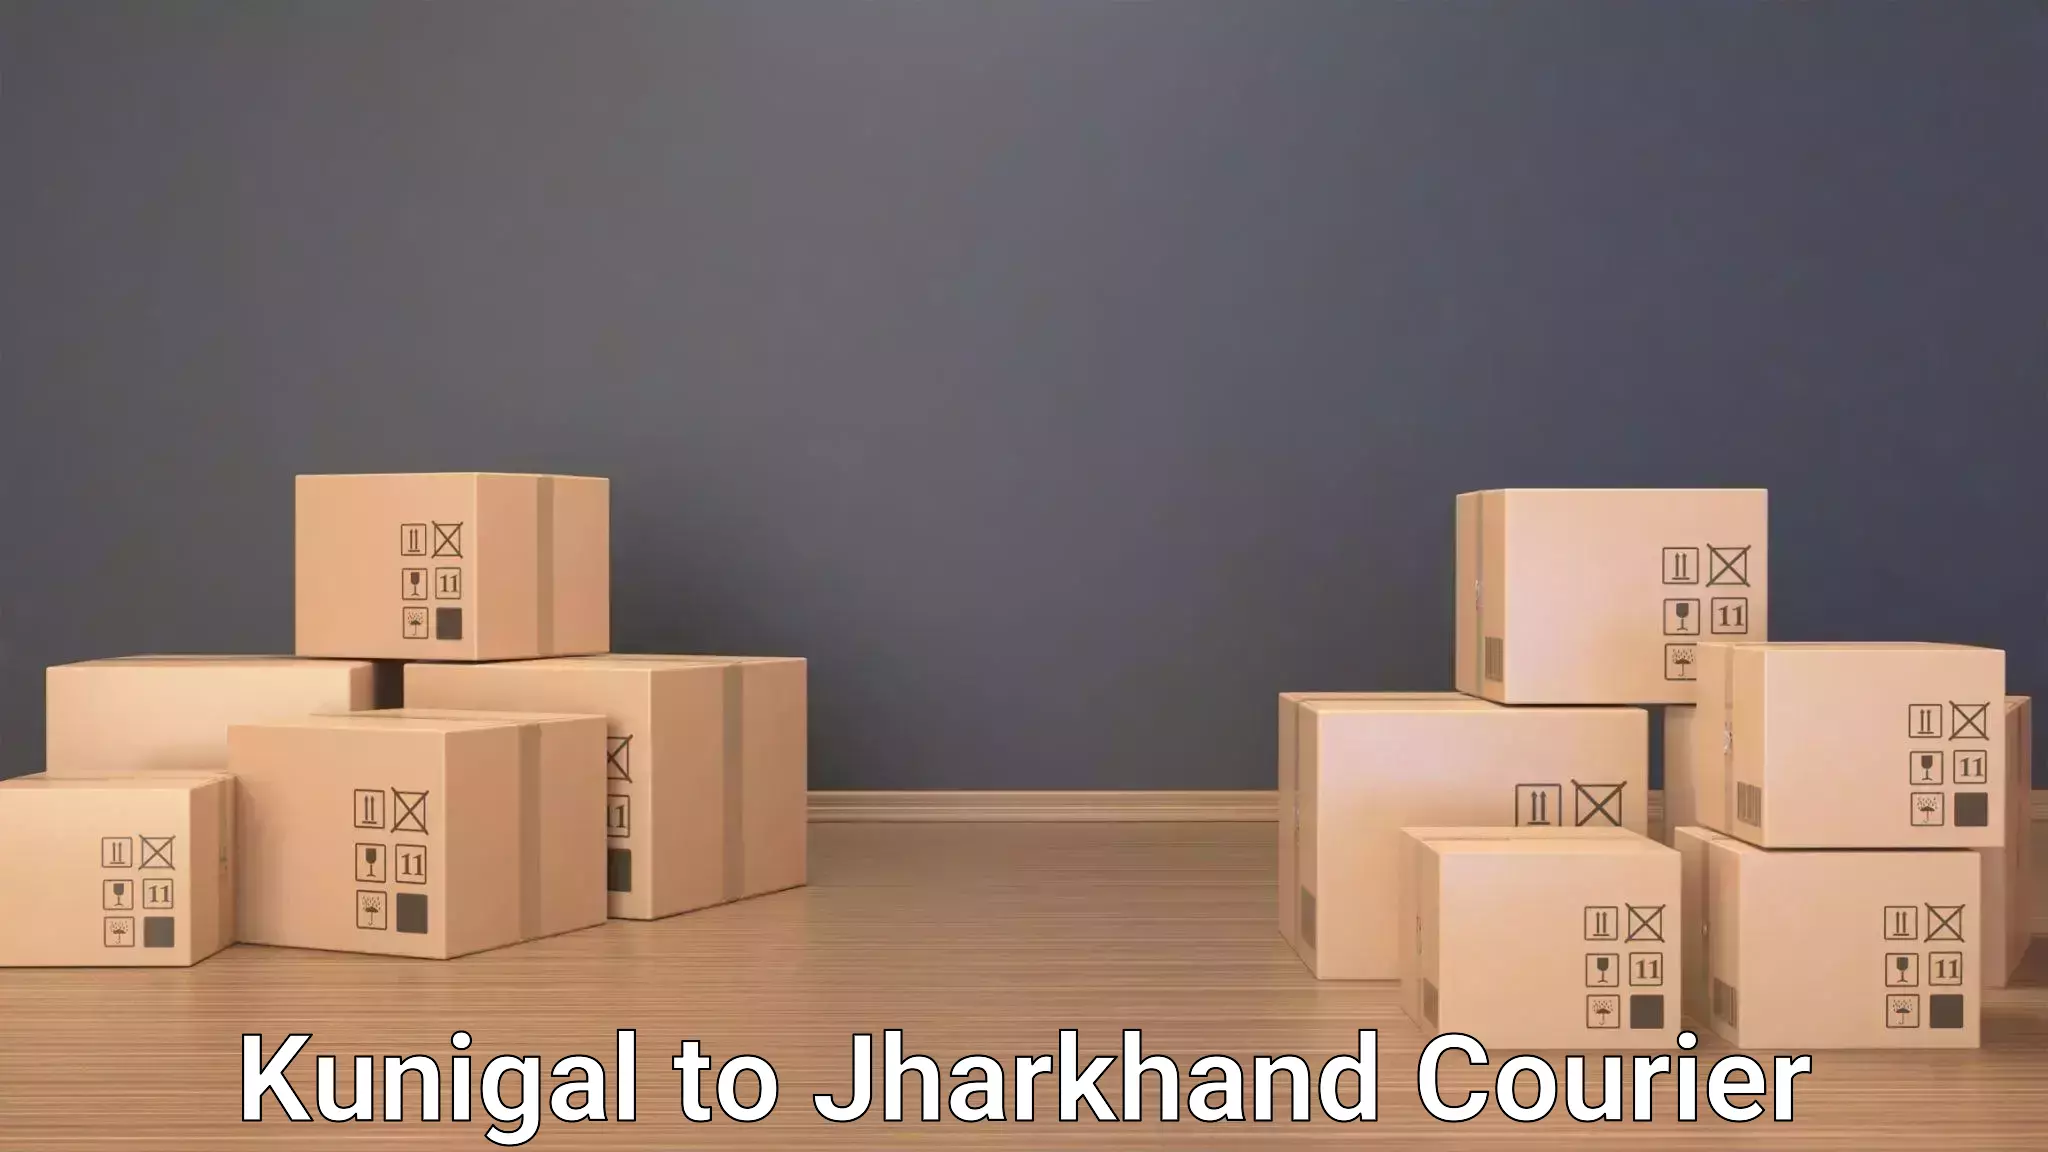 Online luggage shipping booking Kunigal to Peterbar